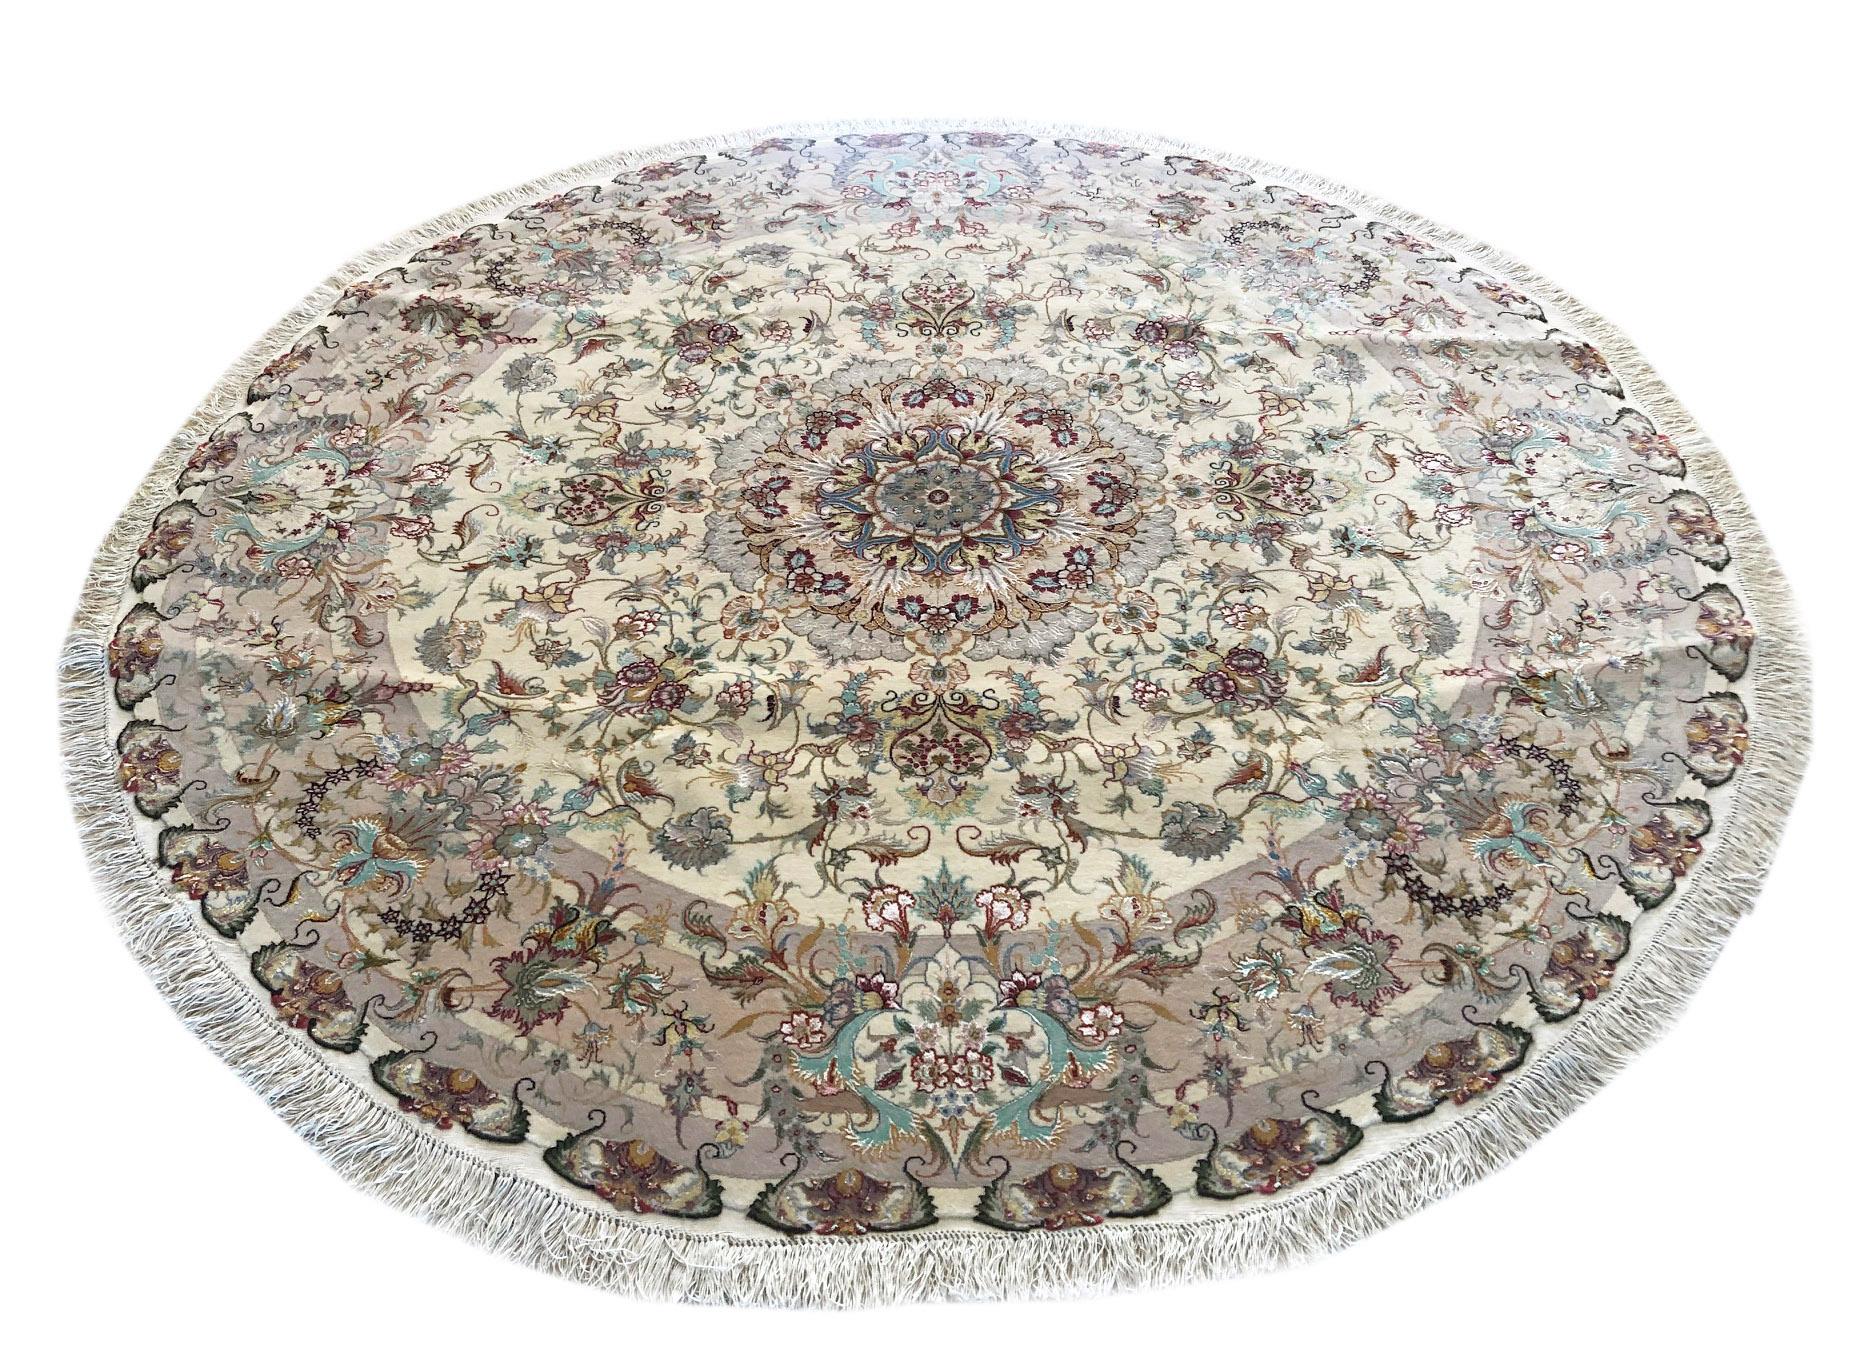 This authentic Persian handmade rug has wool and silk pile with silk foundation. This beautiful rug is from Tabriz and the design is medallion floral. The base color is cream and the border is light brown. Tabriz rugs are very popular and in great